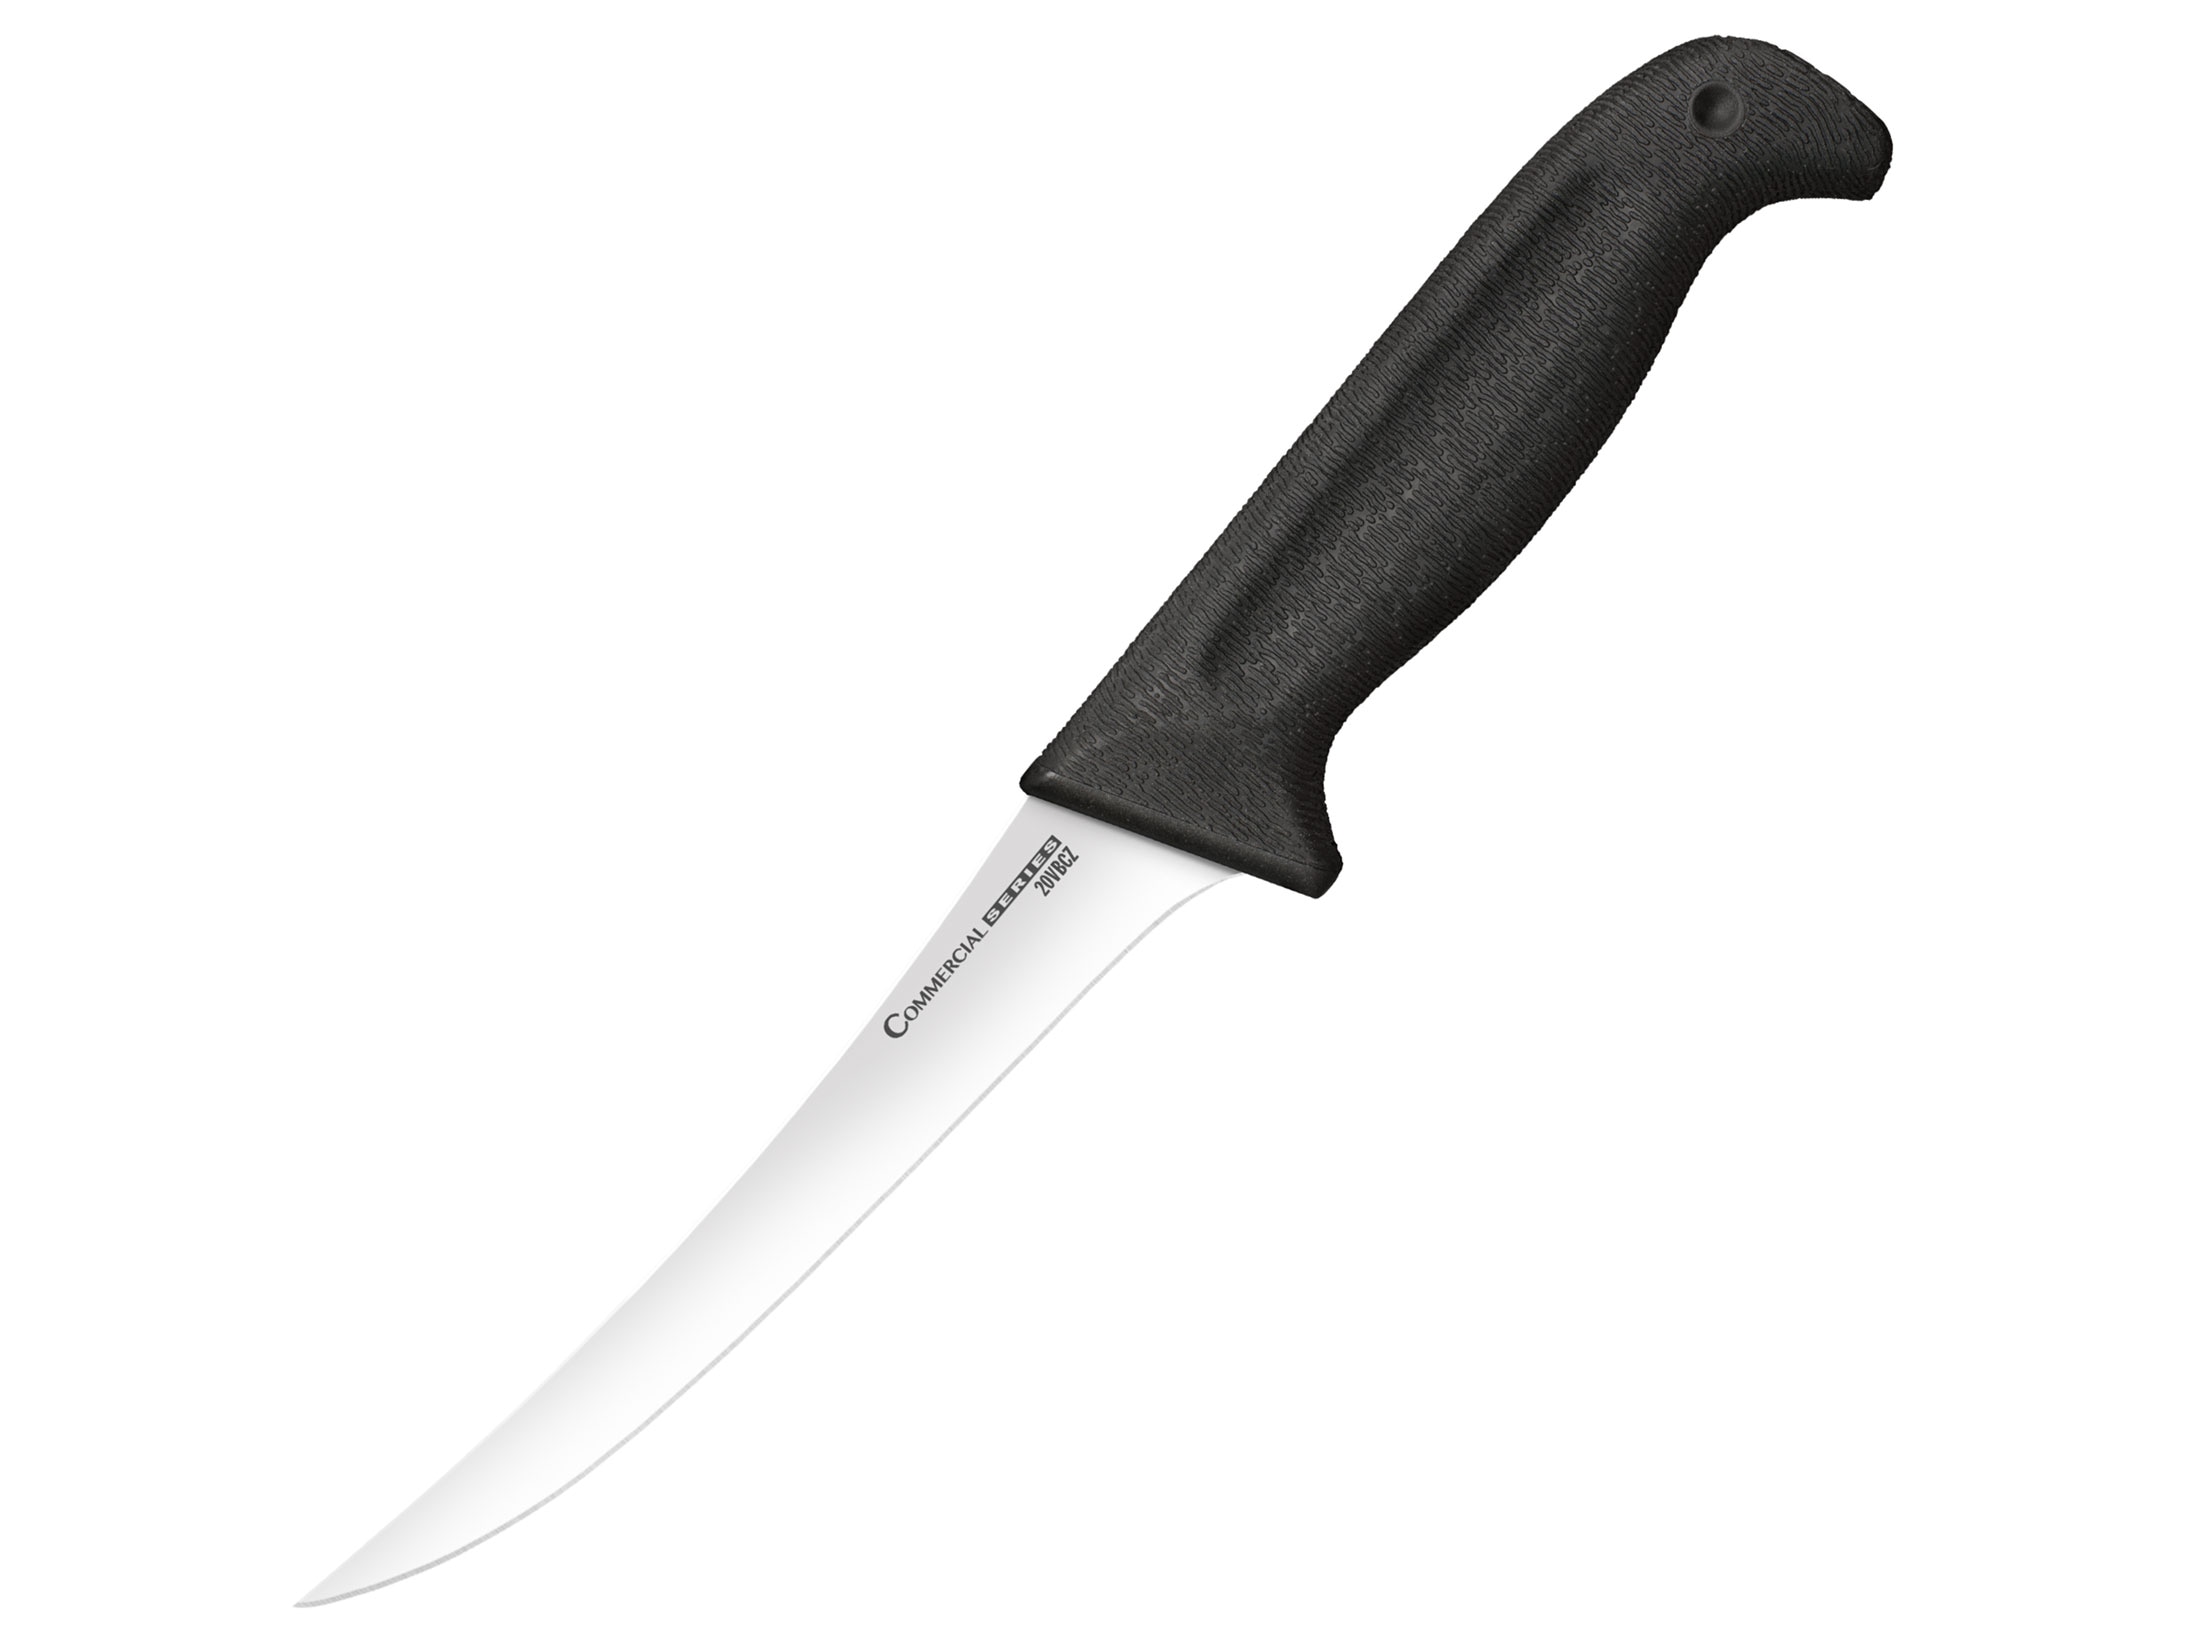 Cold Steel Commercial Series Stiff Curved Boning Knife 6" 4116 Stainless Steel Blade Kray-Ex Handle Black